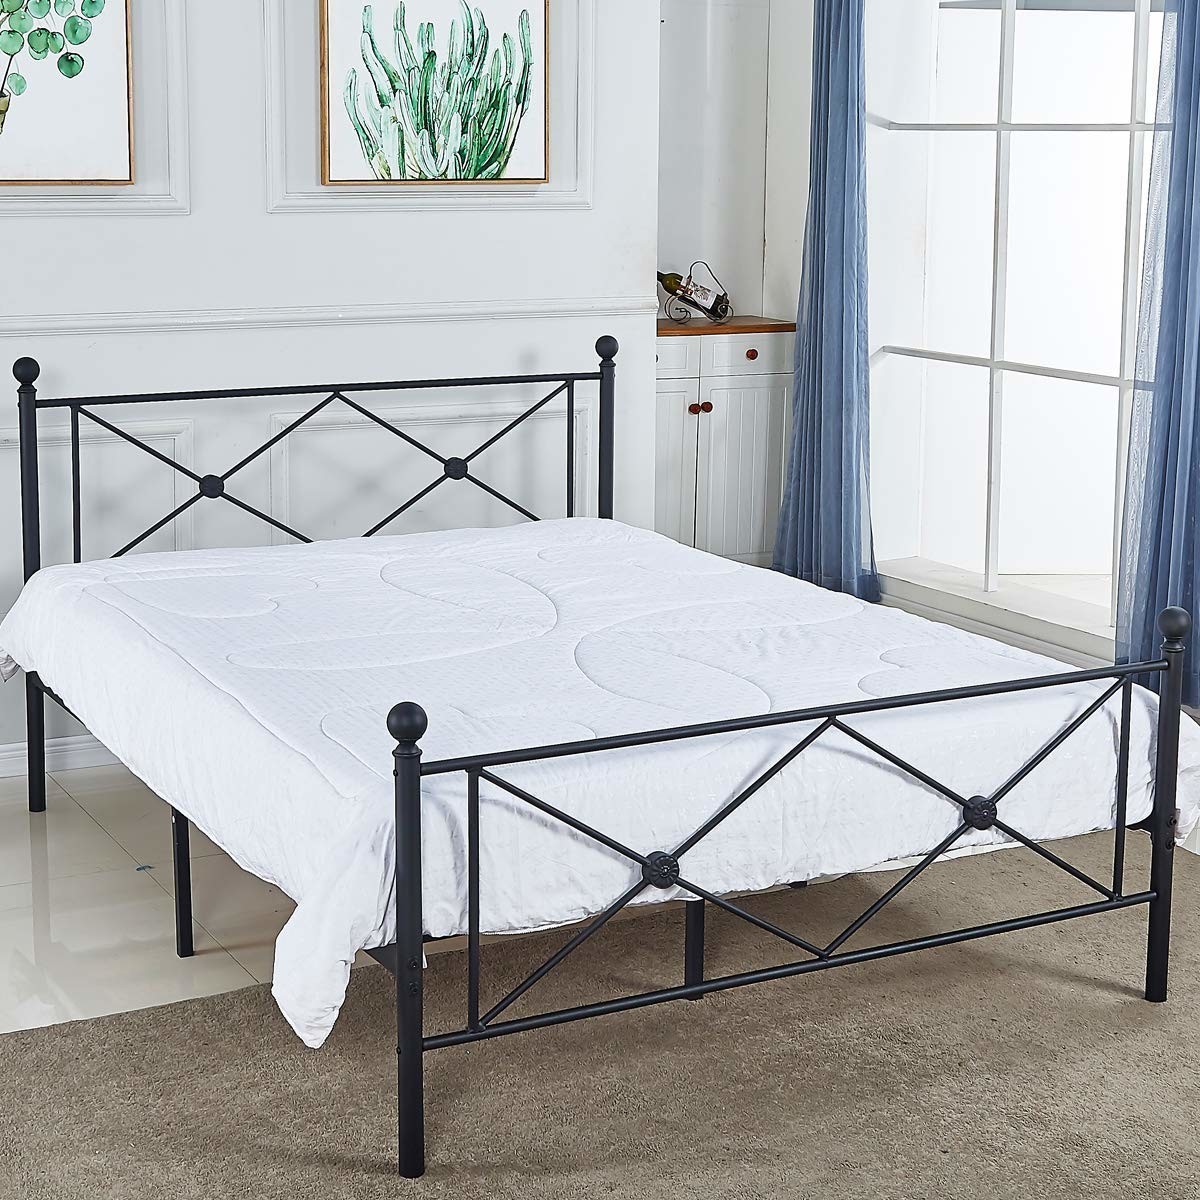 Metal King Size Iron Bed Antique Modern Design For Home Hotel ISO9001